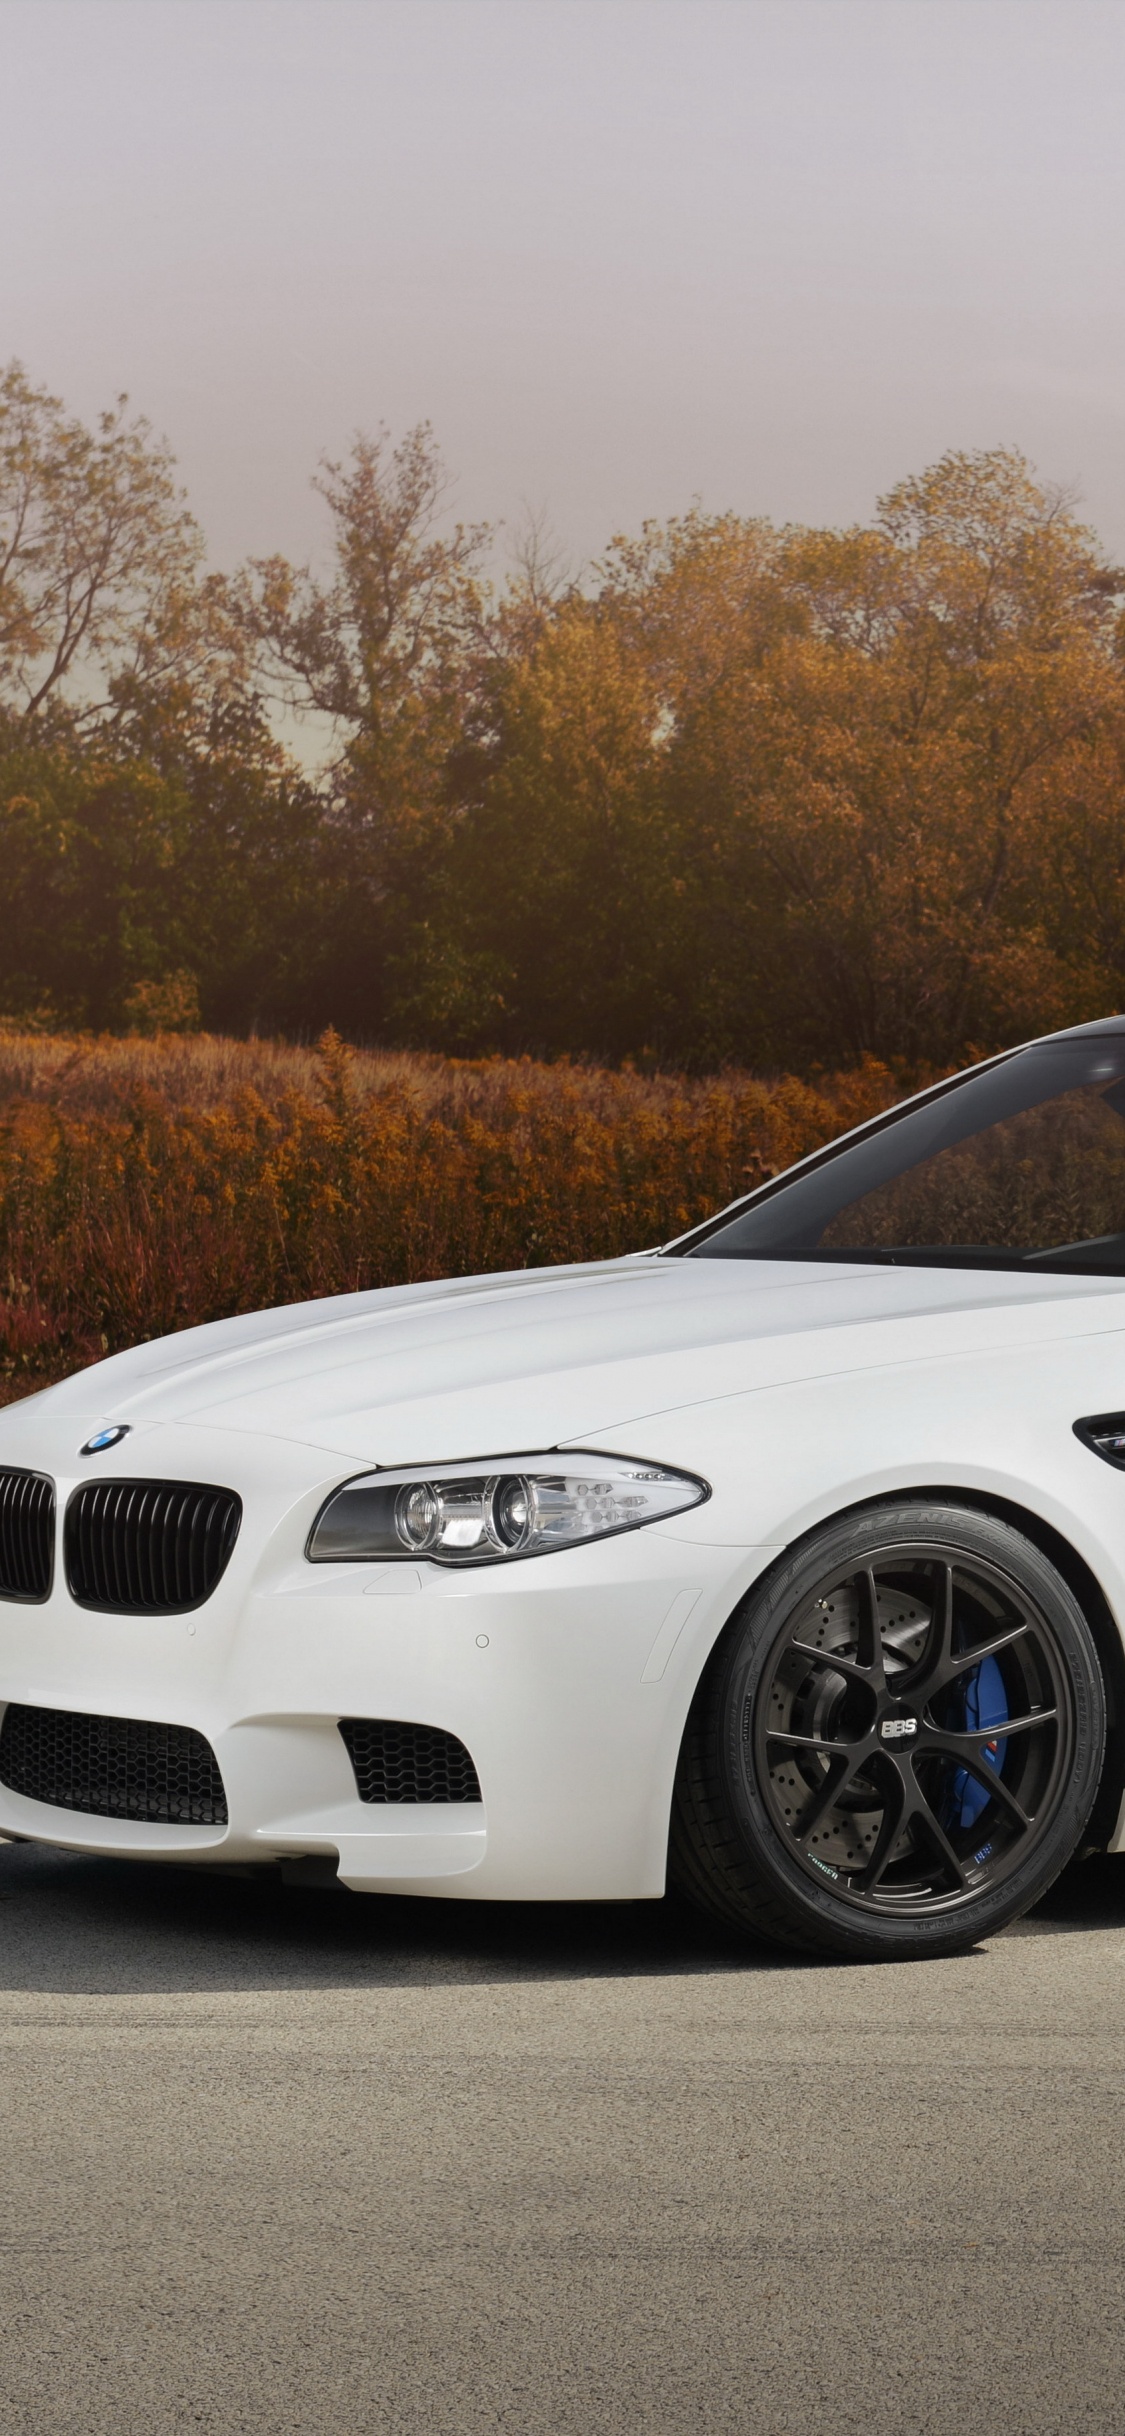 White Bmw m 3 Coupe Parked on Gray Asphalt Road During Daytime. Wallpaper in 1125x2436 Resolution